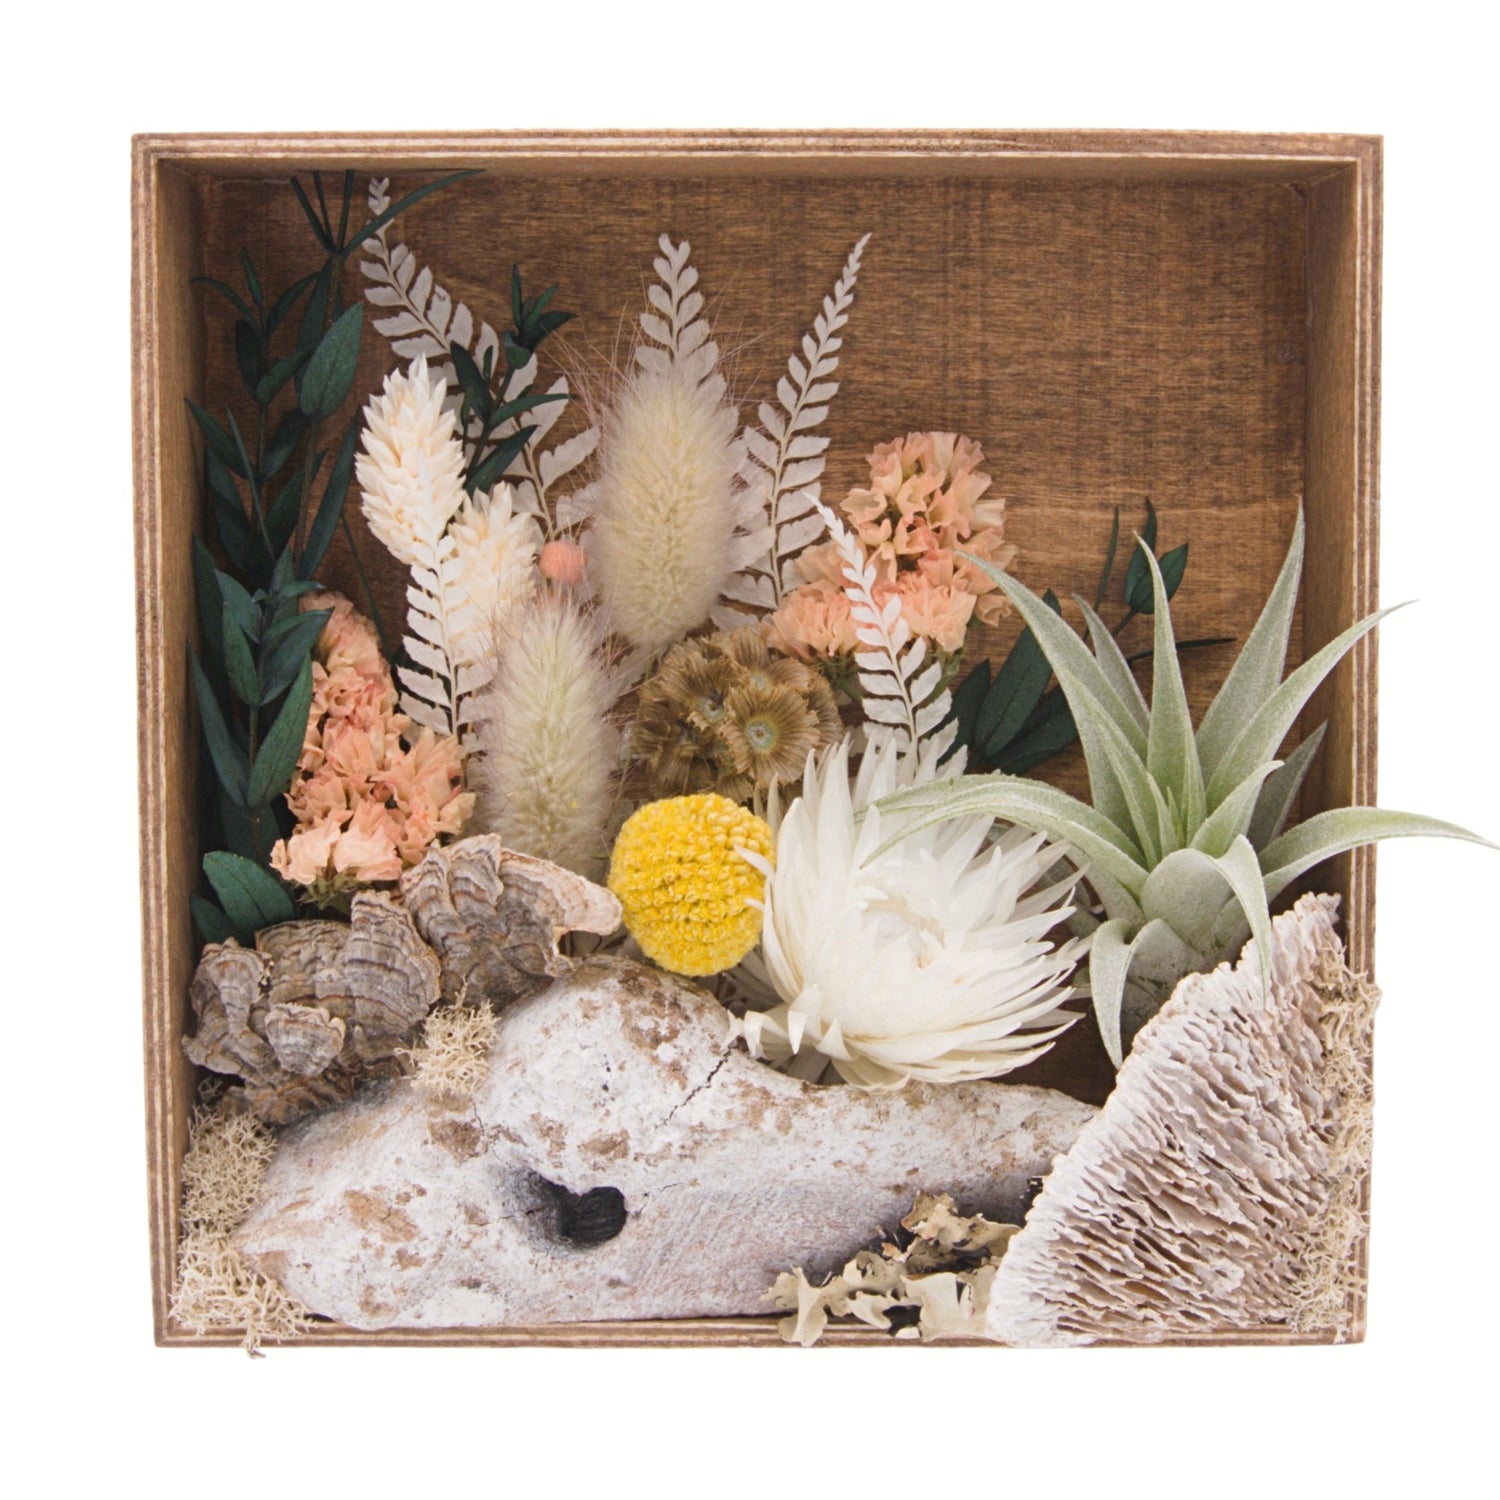 Frame with airplants, moss, dried flowers and wood